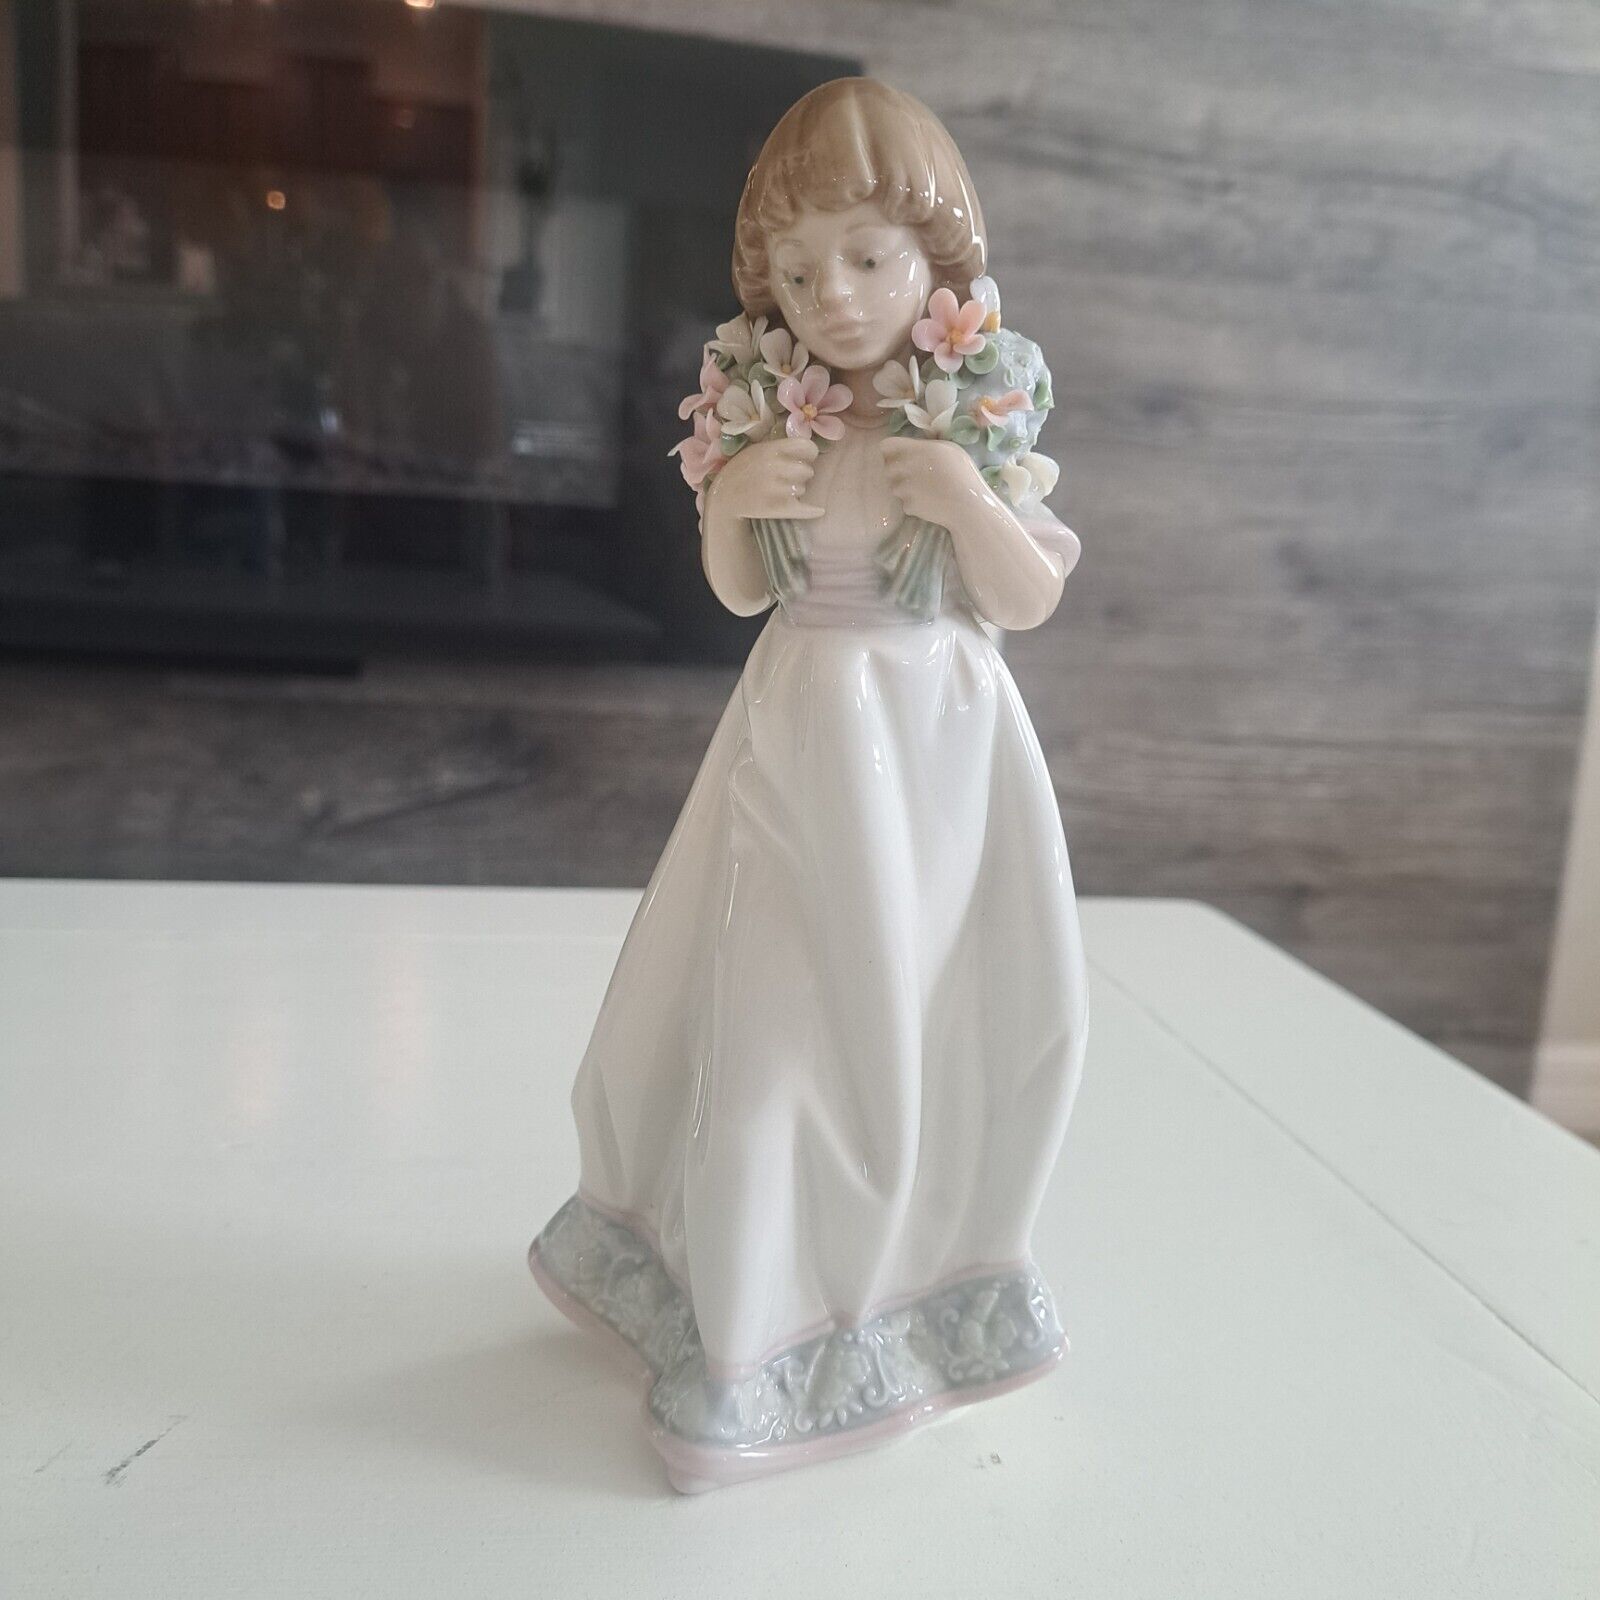 1987 Lladro Spain Limited Edition Spring Bouquet 7603 Figurine